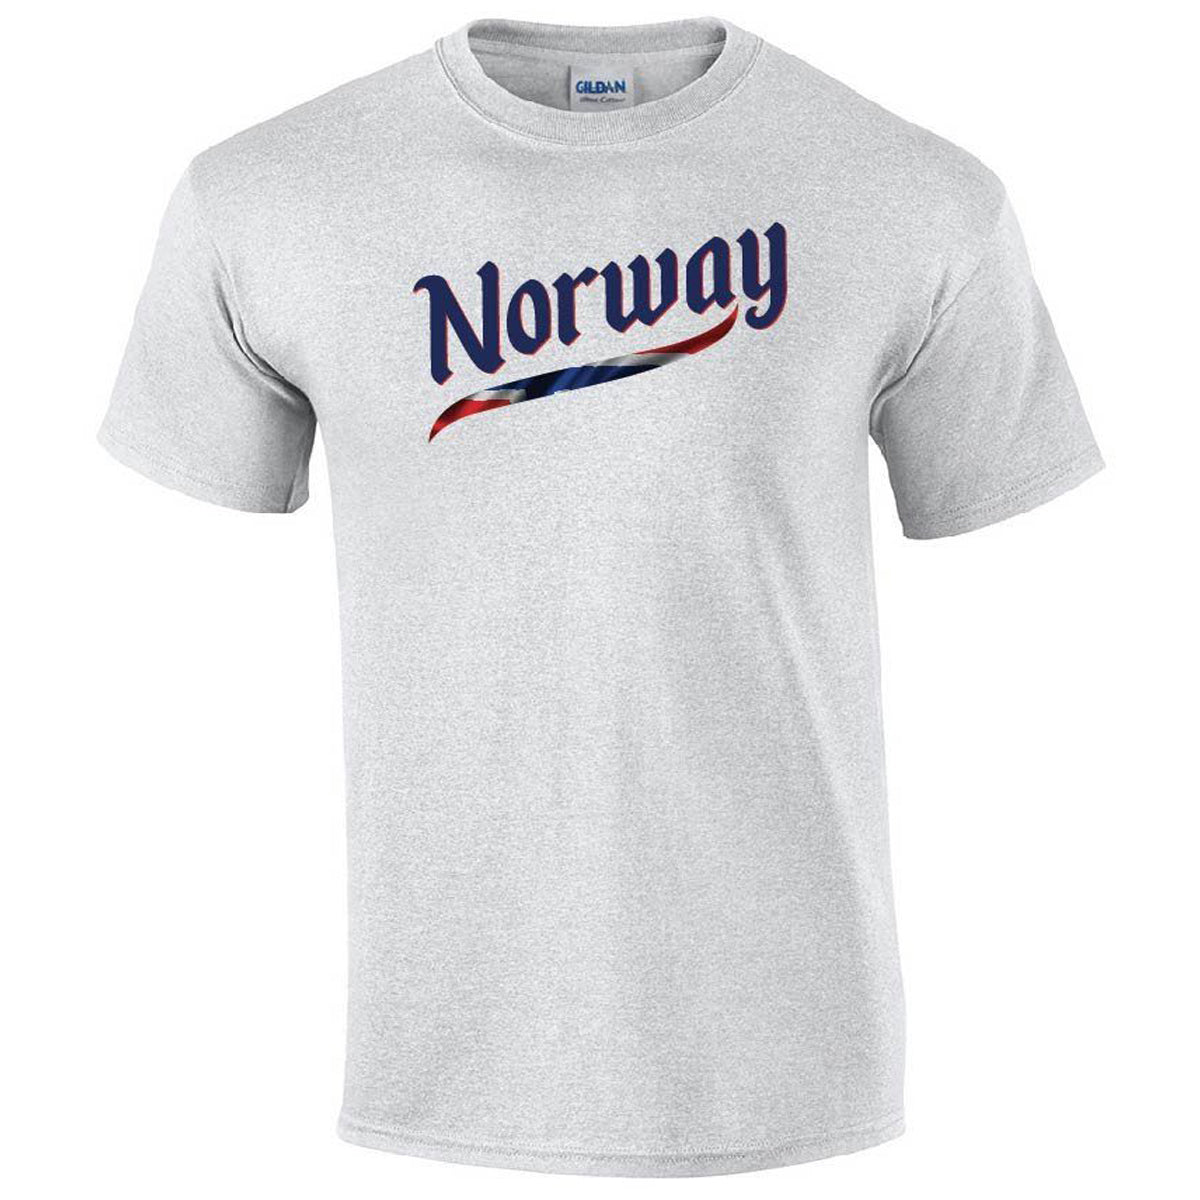 Norway Script World Cup 2019 Printed Tee T-shirts 411 Youth Medium Ash Youth